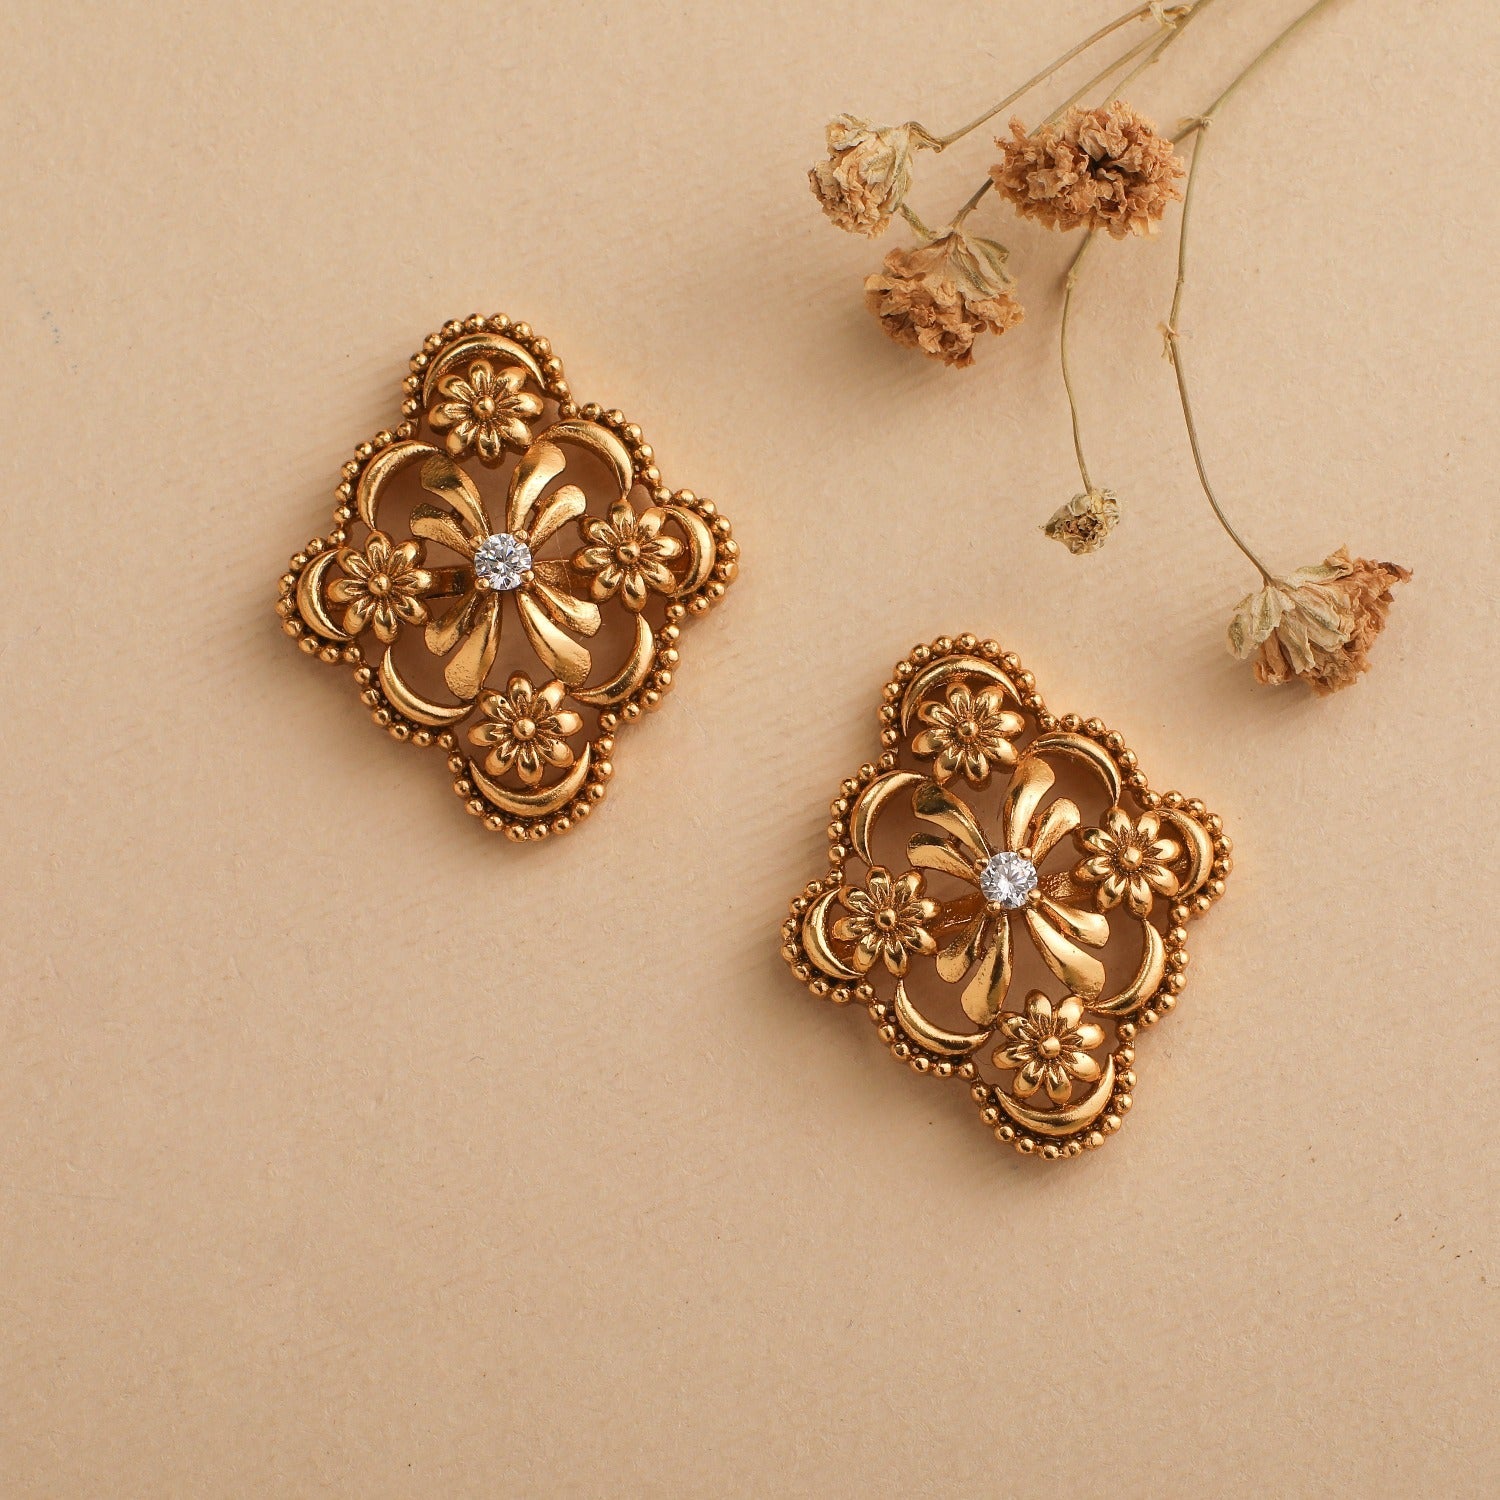 9 Stud Earrings to Glam Up Your Everyday Look!